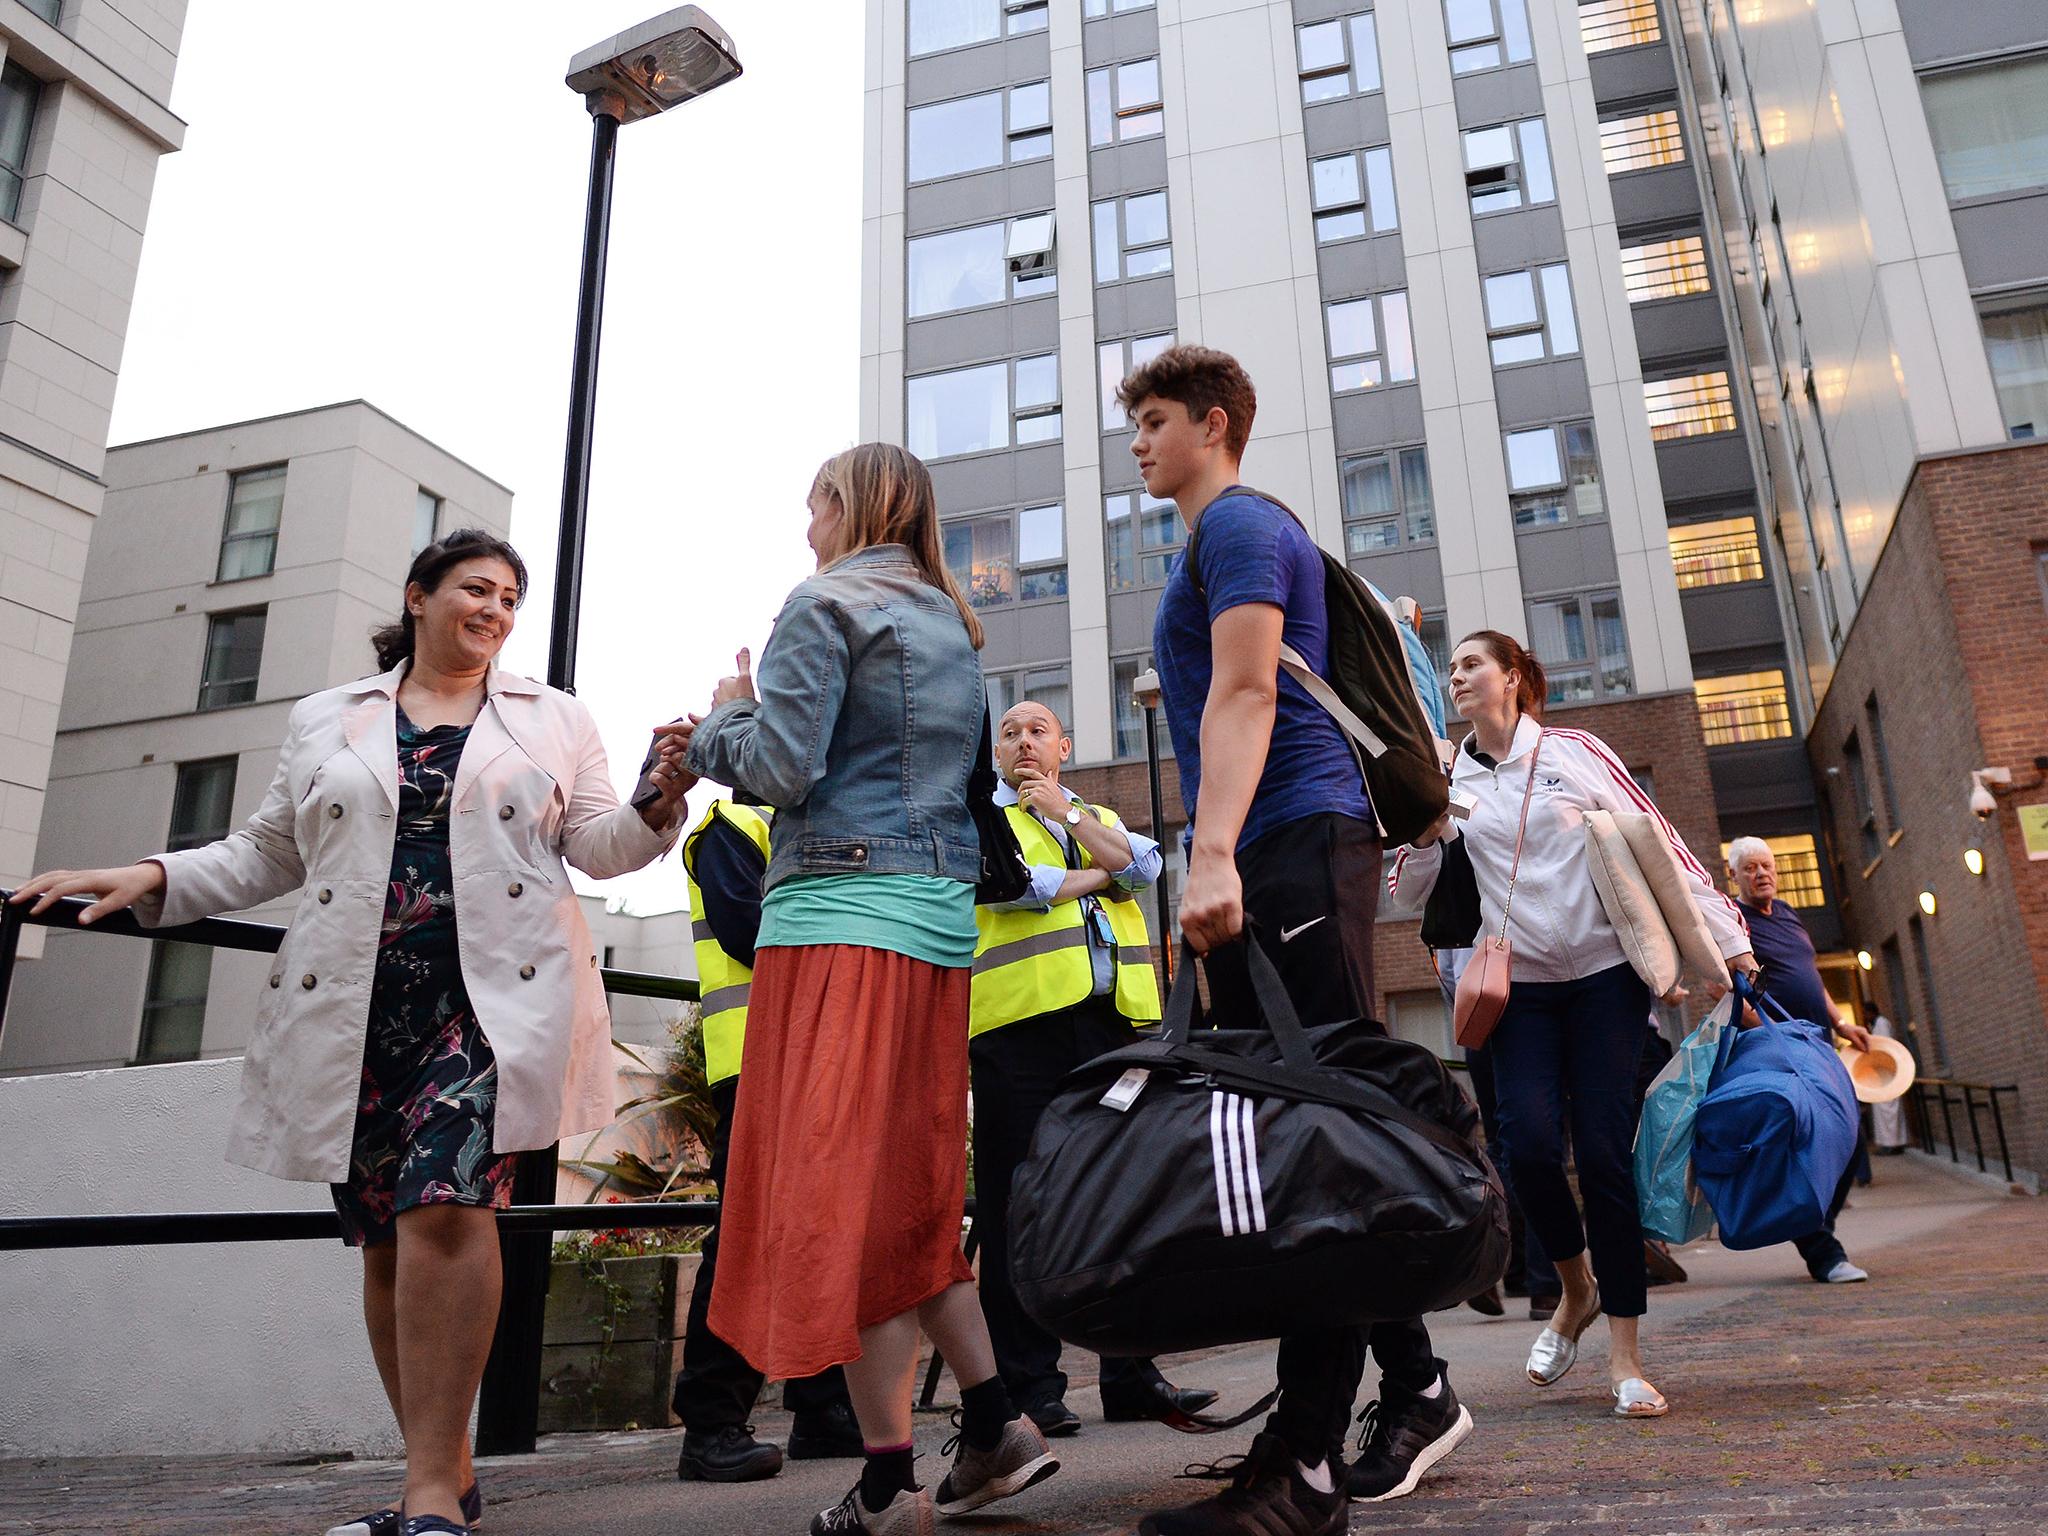 People who were ordered to leave their homes expressed fury at the 'chaotic' response by the council, claiming it has left them with 'no option' but to return to their flats and spend another night in the towers despite the safety warnings